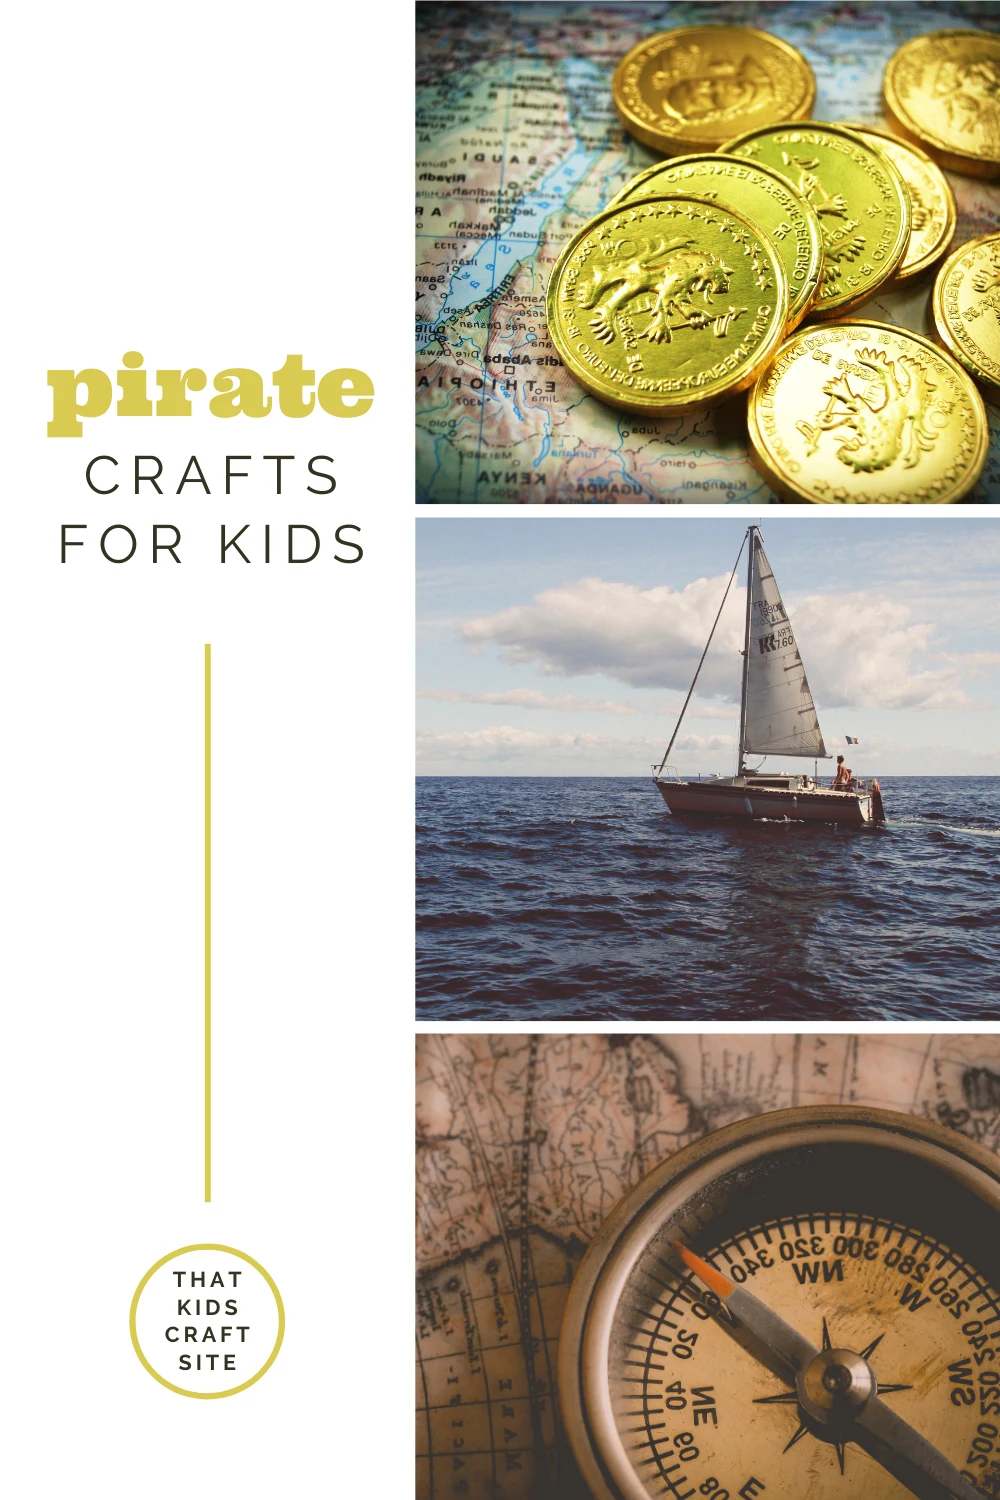 Pirate Crafts for Kids